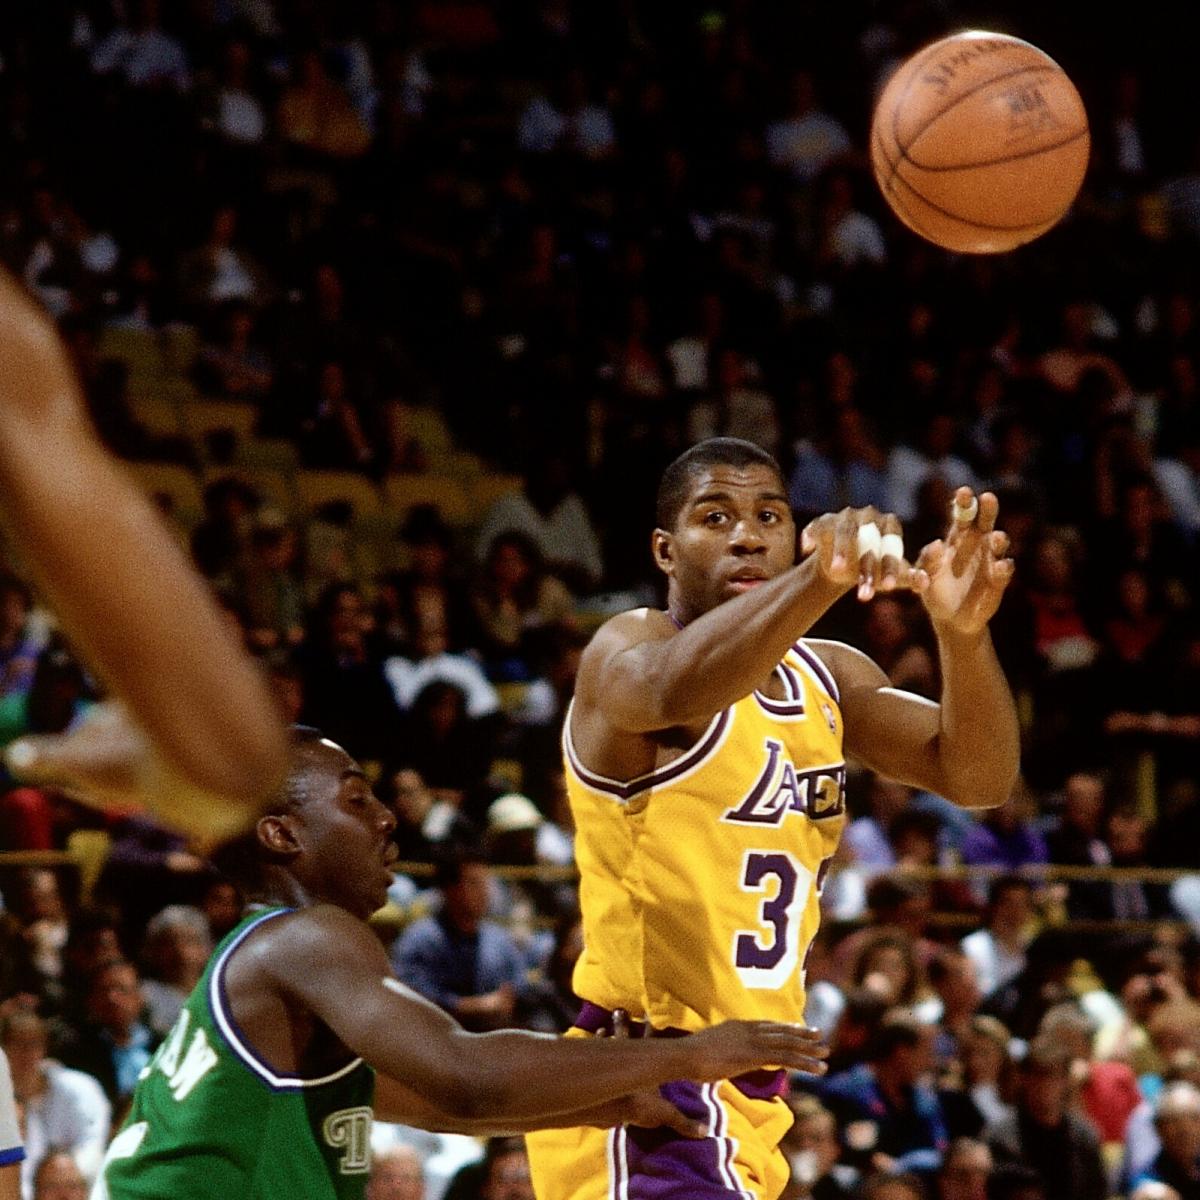 Celebrate Magic Johnson's 55th Birthday with Some of His Amazing Passes